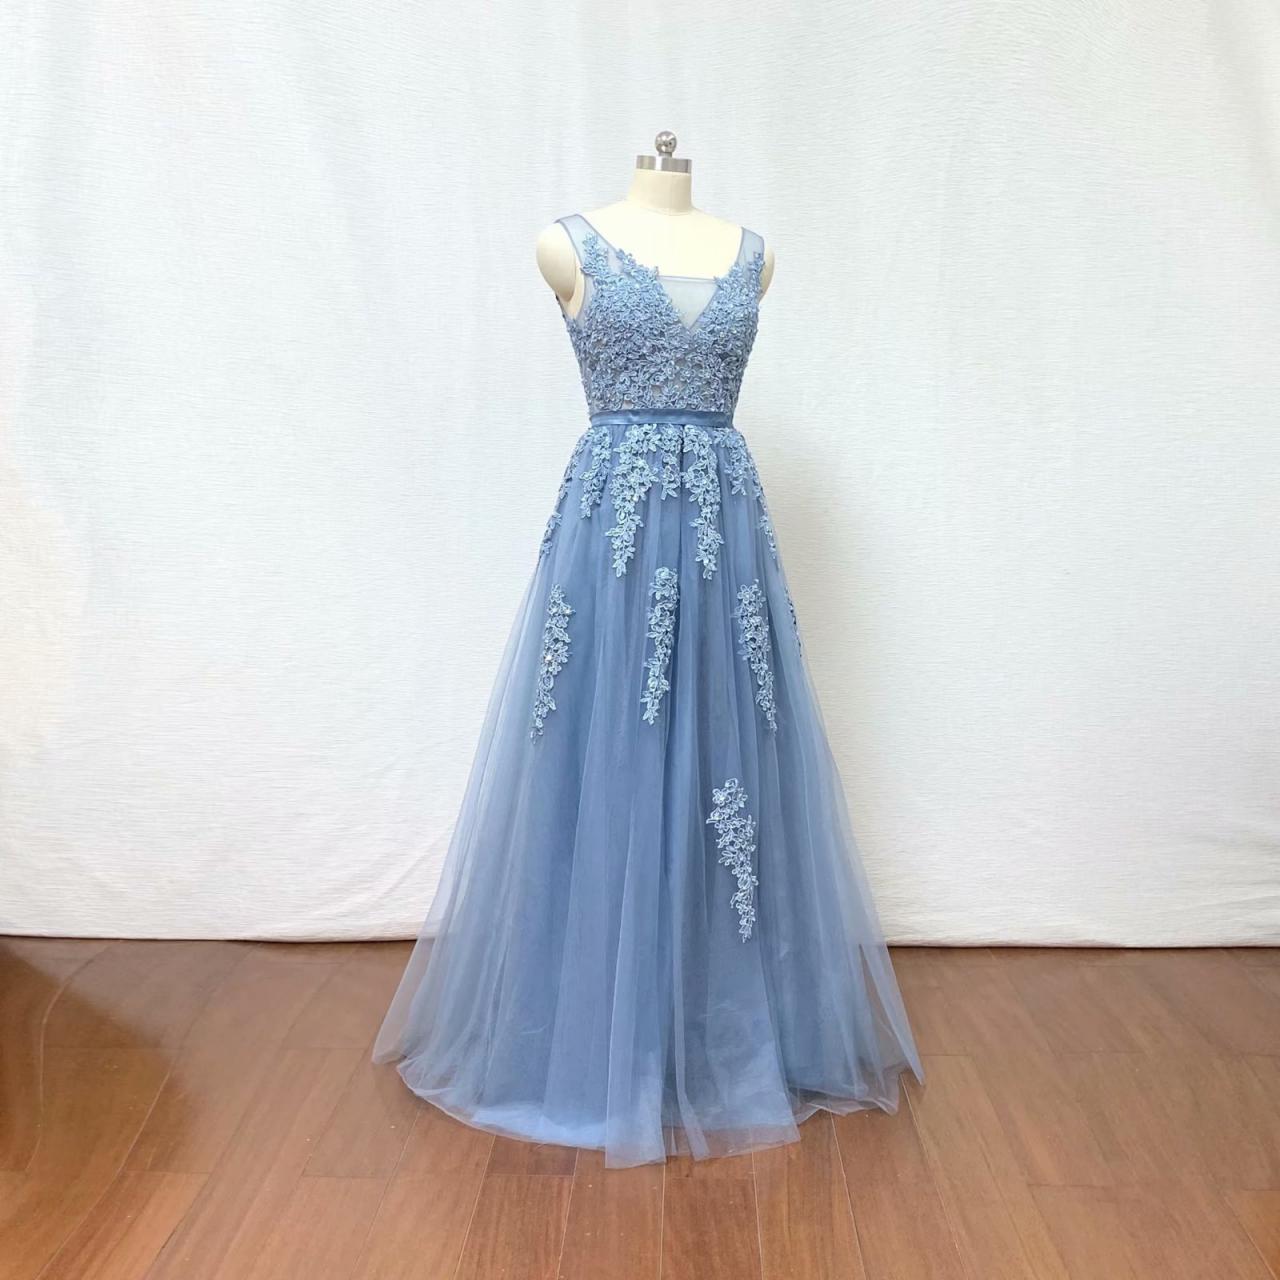 2019 Prom Dress Light Blue Lace Applique Formal Dresses Evening Dresses Backless Tulle Prom Gowns